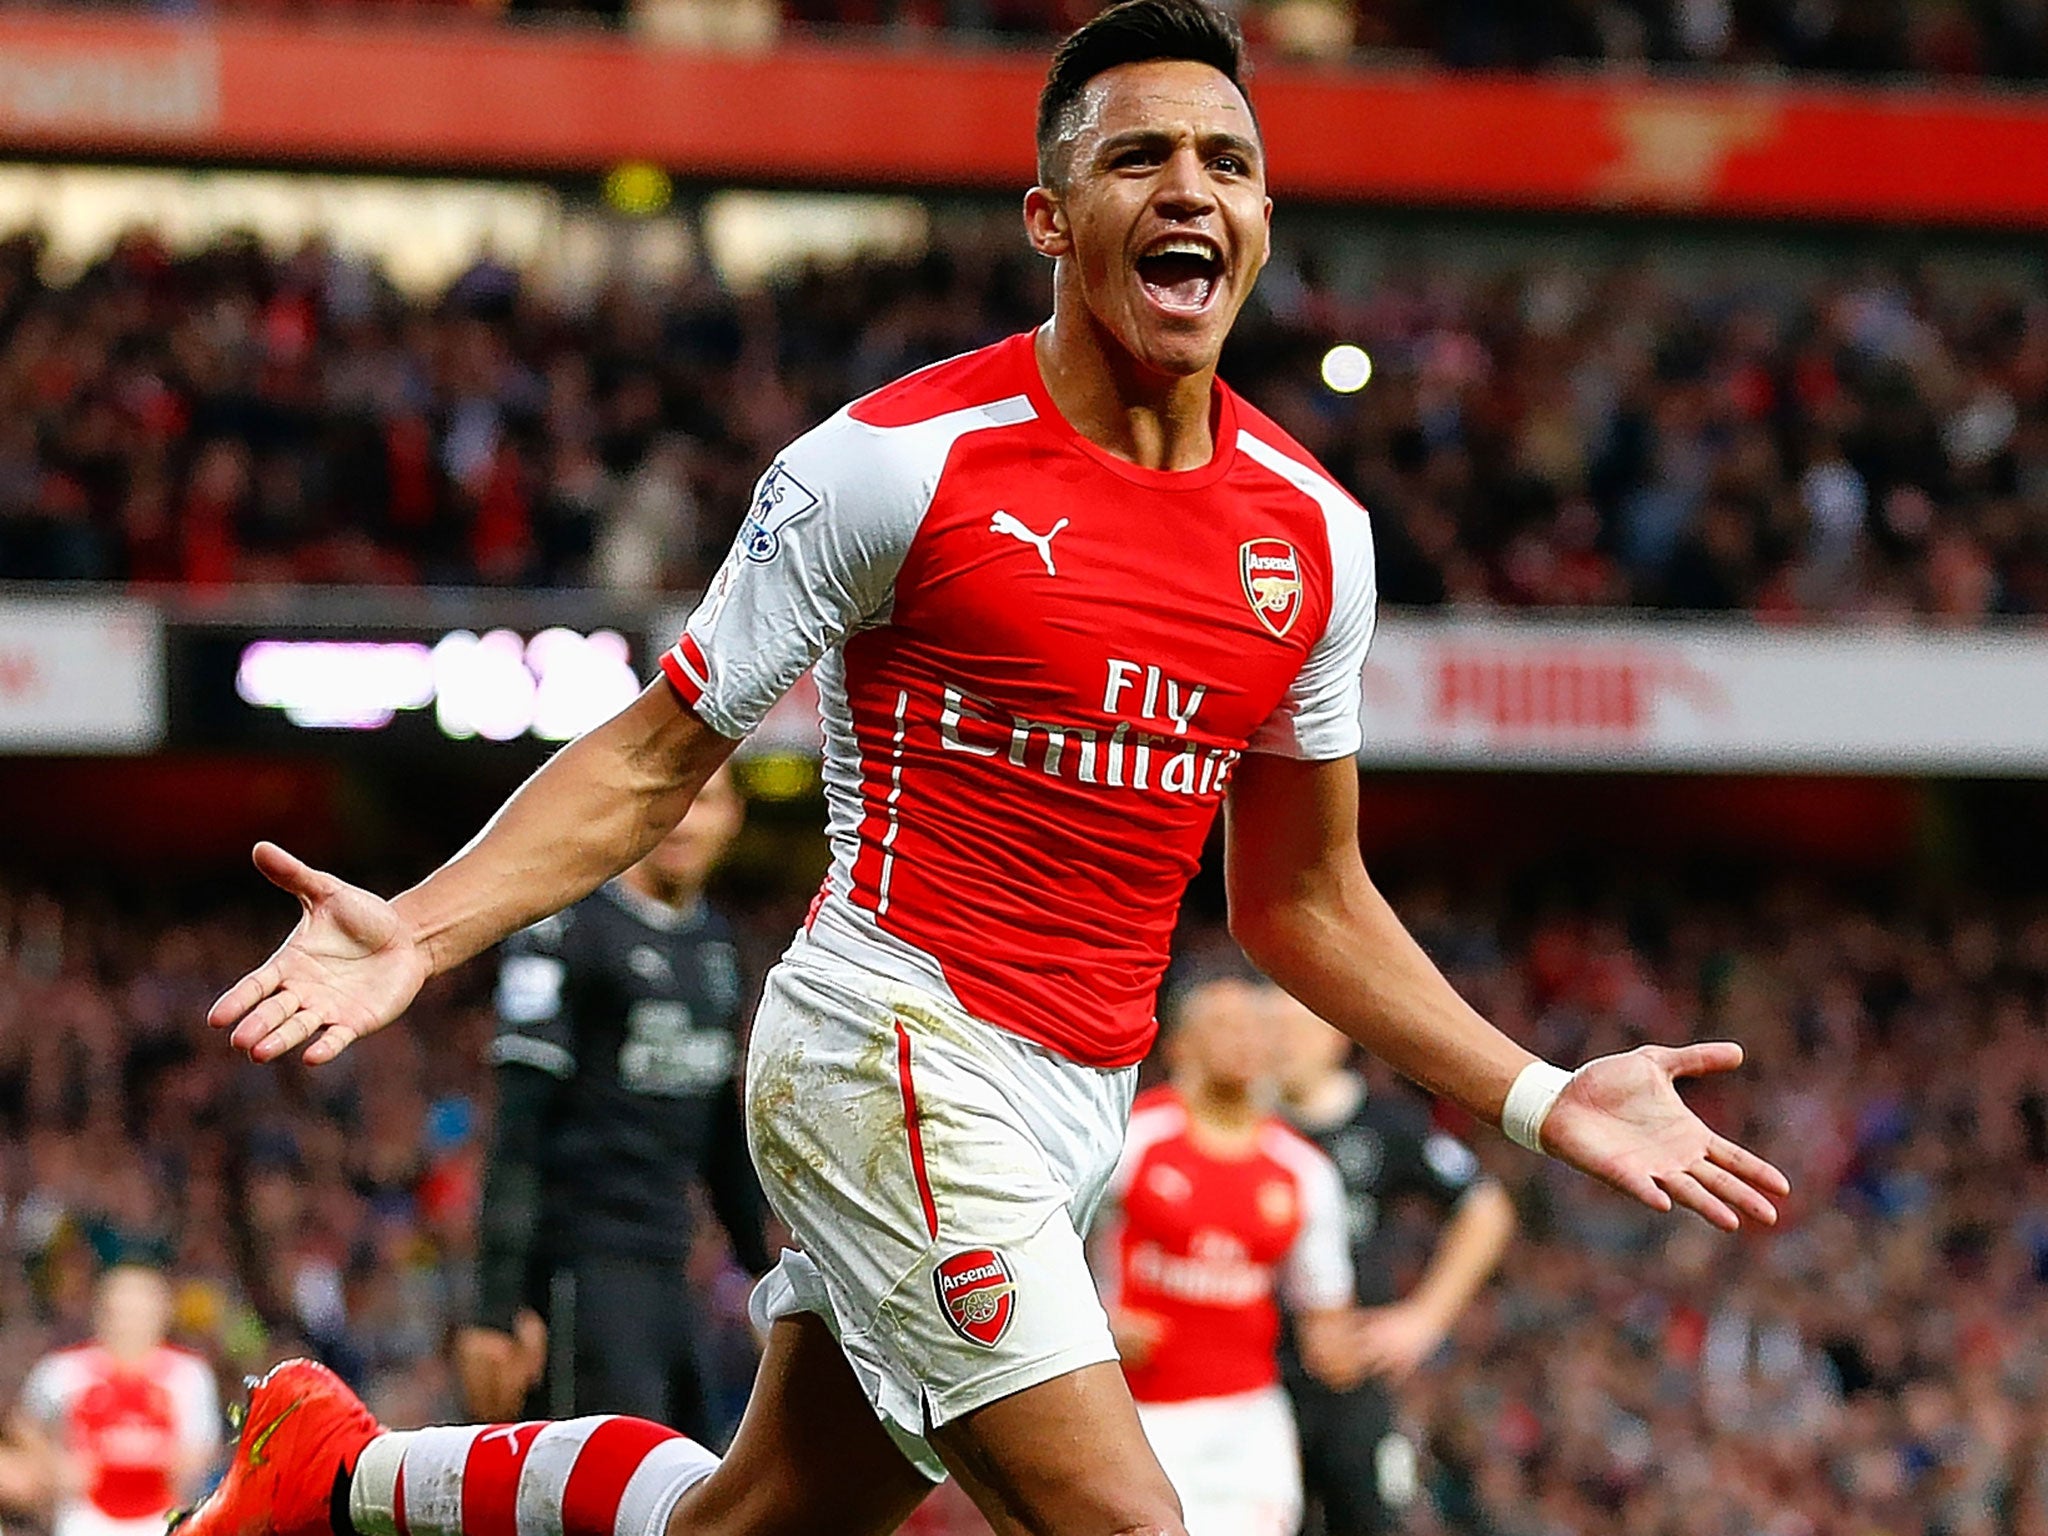 Alexis Sanchez has proved a wonderful signing for Arsenal and Arsène Wenger